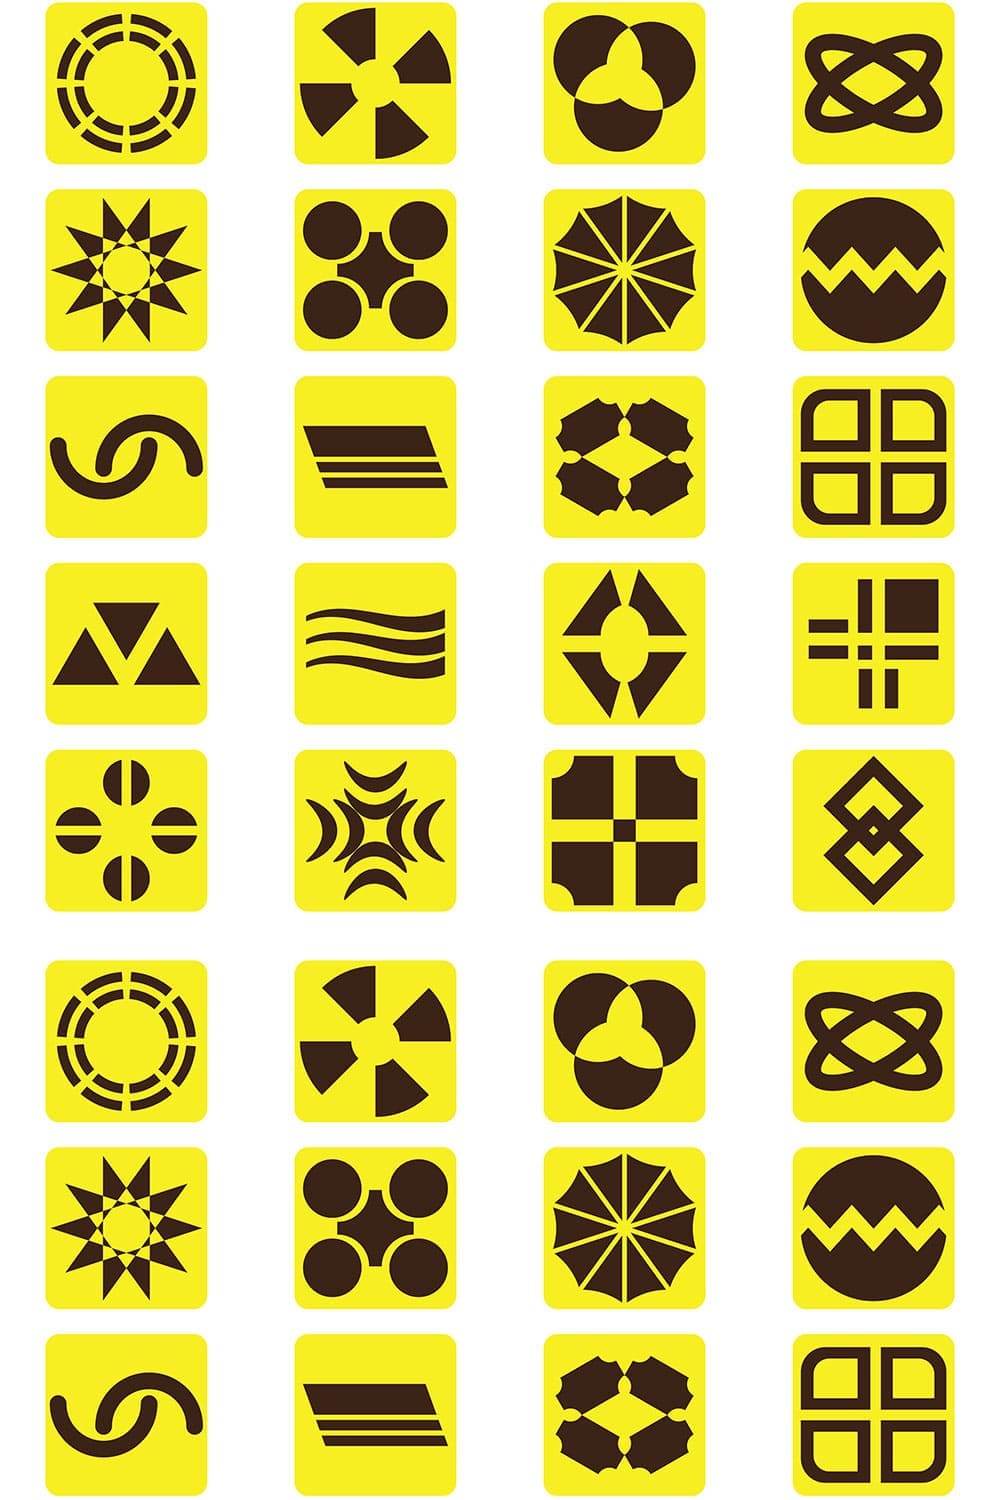 Black yellow absctract icons set, picture for pinterest.